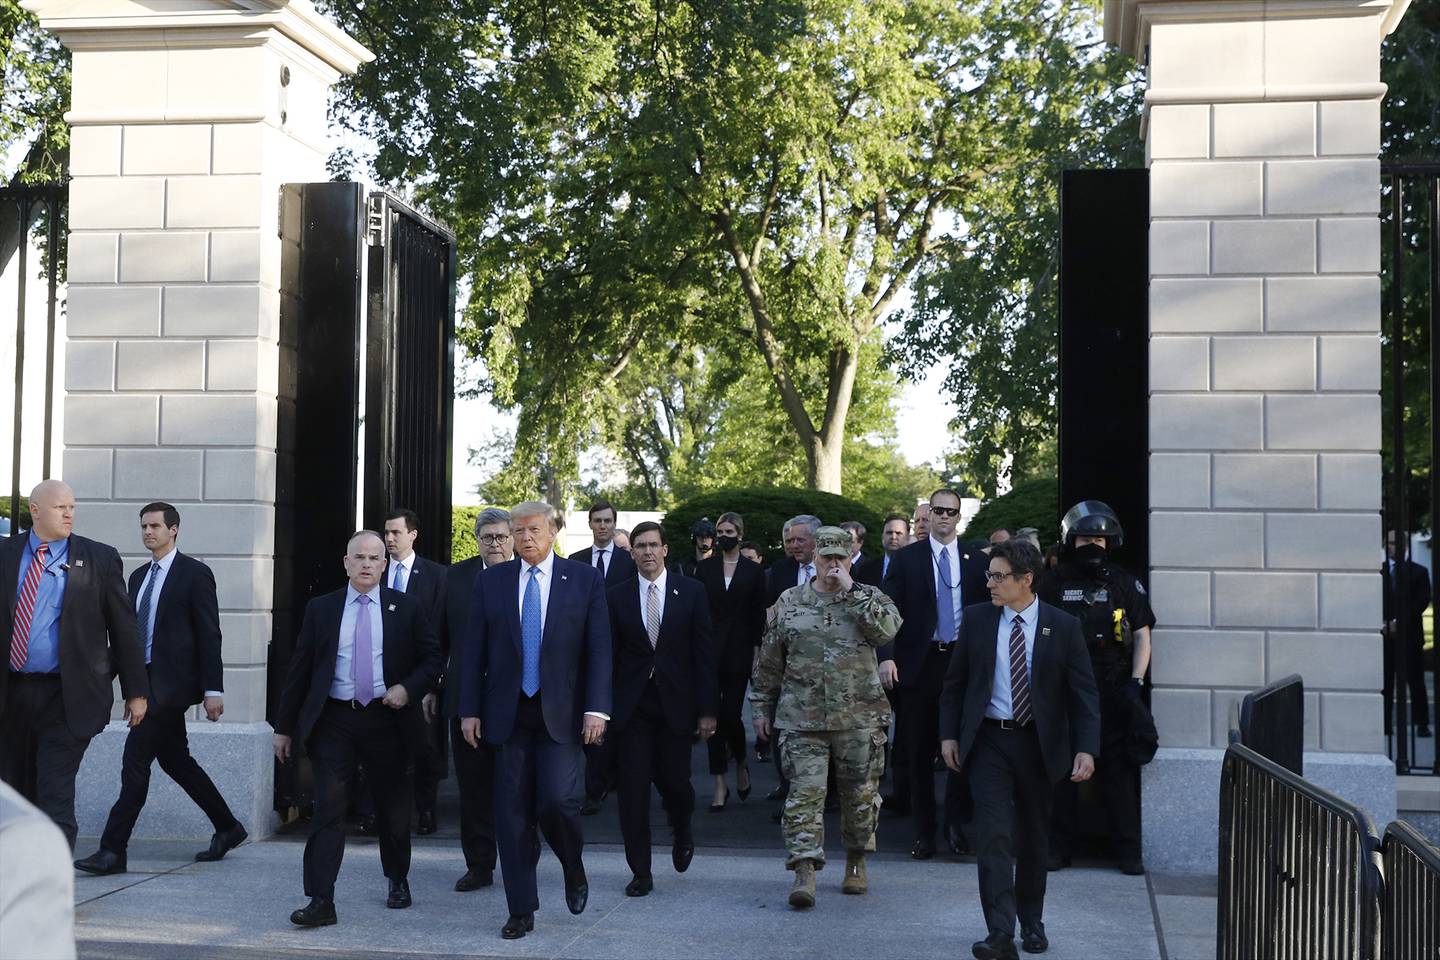 President Donald Trump walks from the gates of the White House to visit St. John's Church across Lafayette Park Monday, June 1, 2020, in Washington.